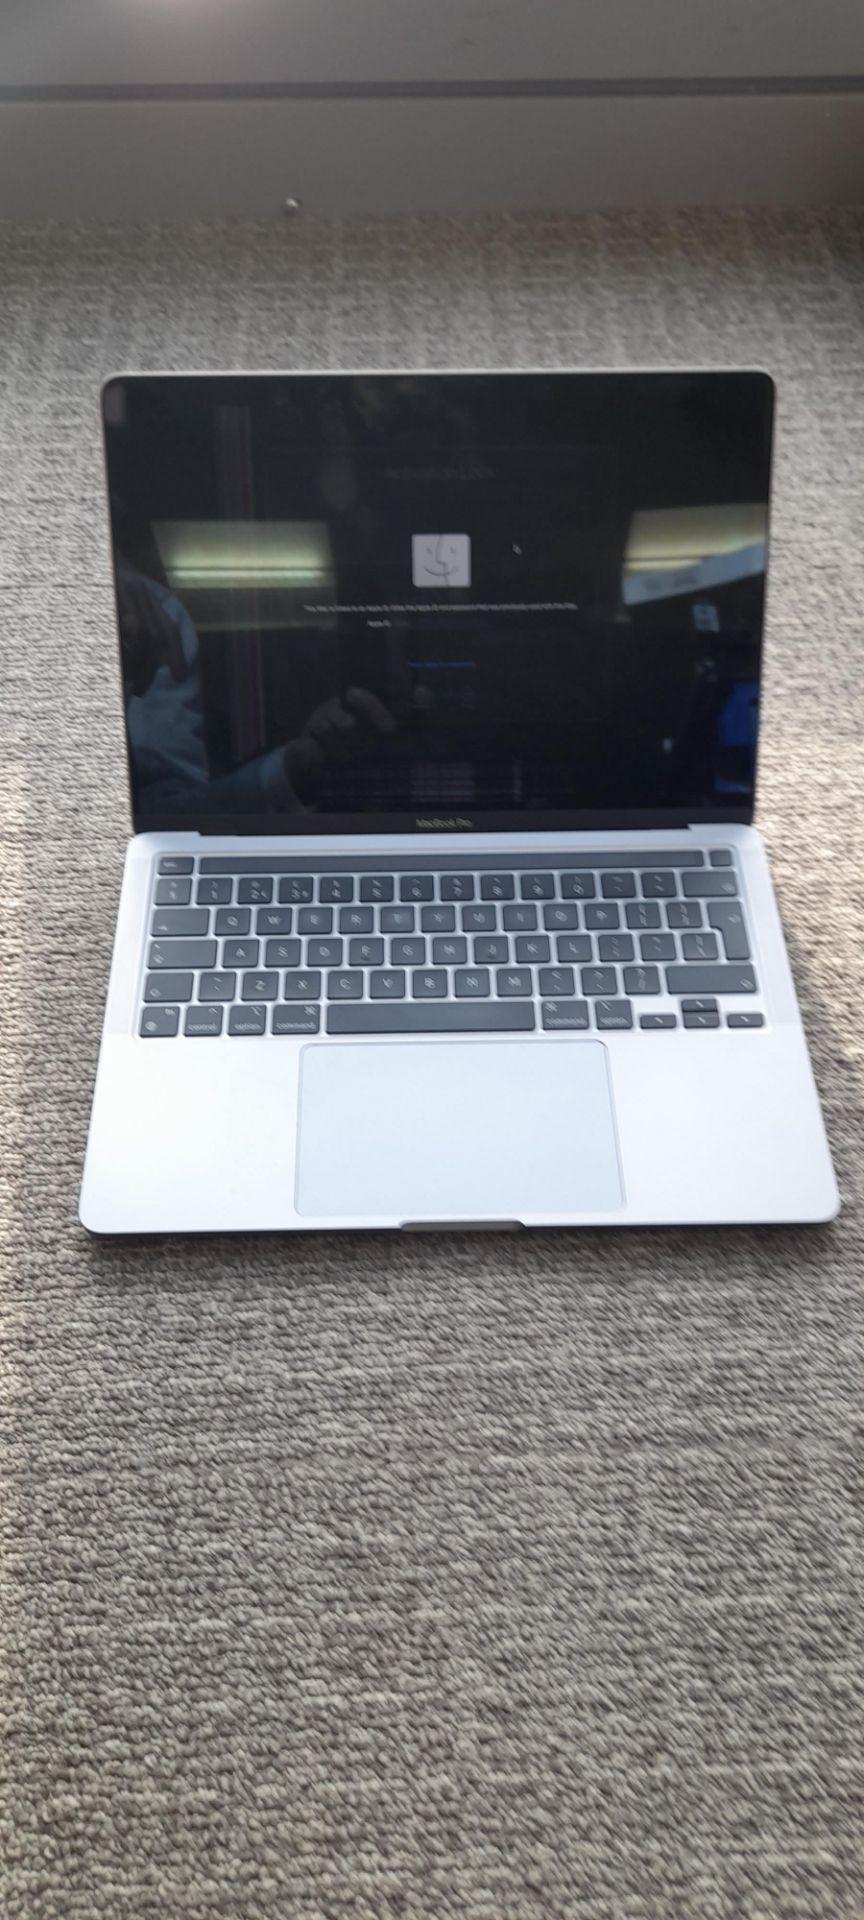 MacBook Pro 13", M1, A2338 EMC 3578, S/N: FVFGW2REQ05F – Defective display – In recovery mode - Image 2 of 6